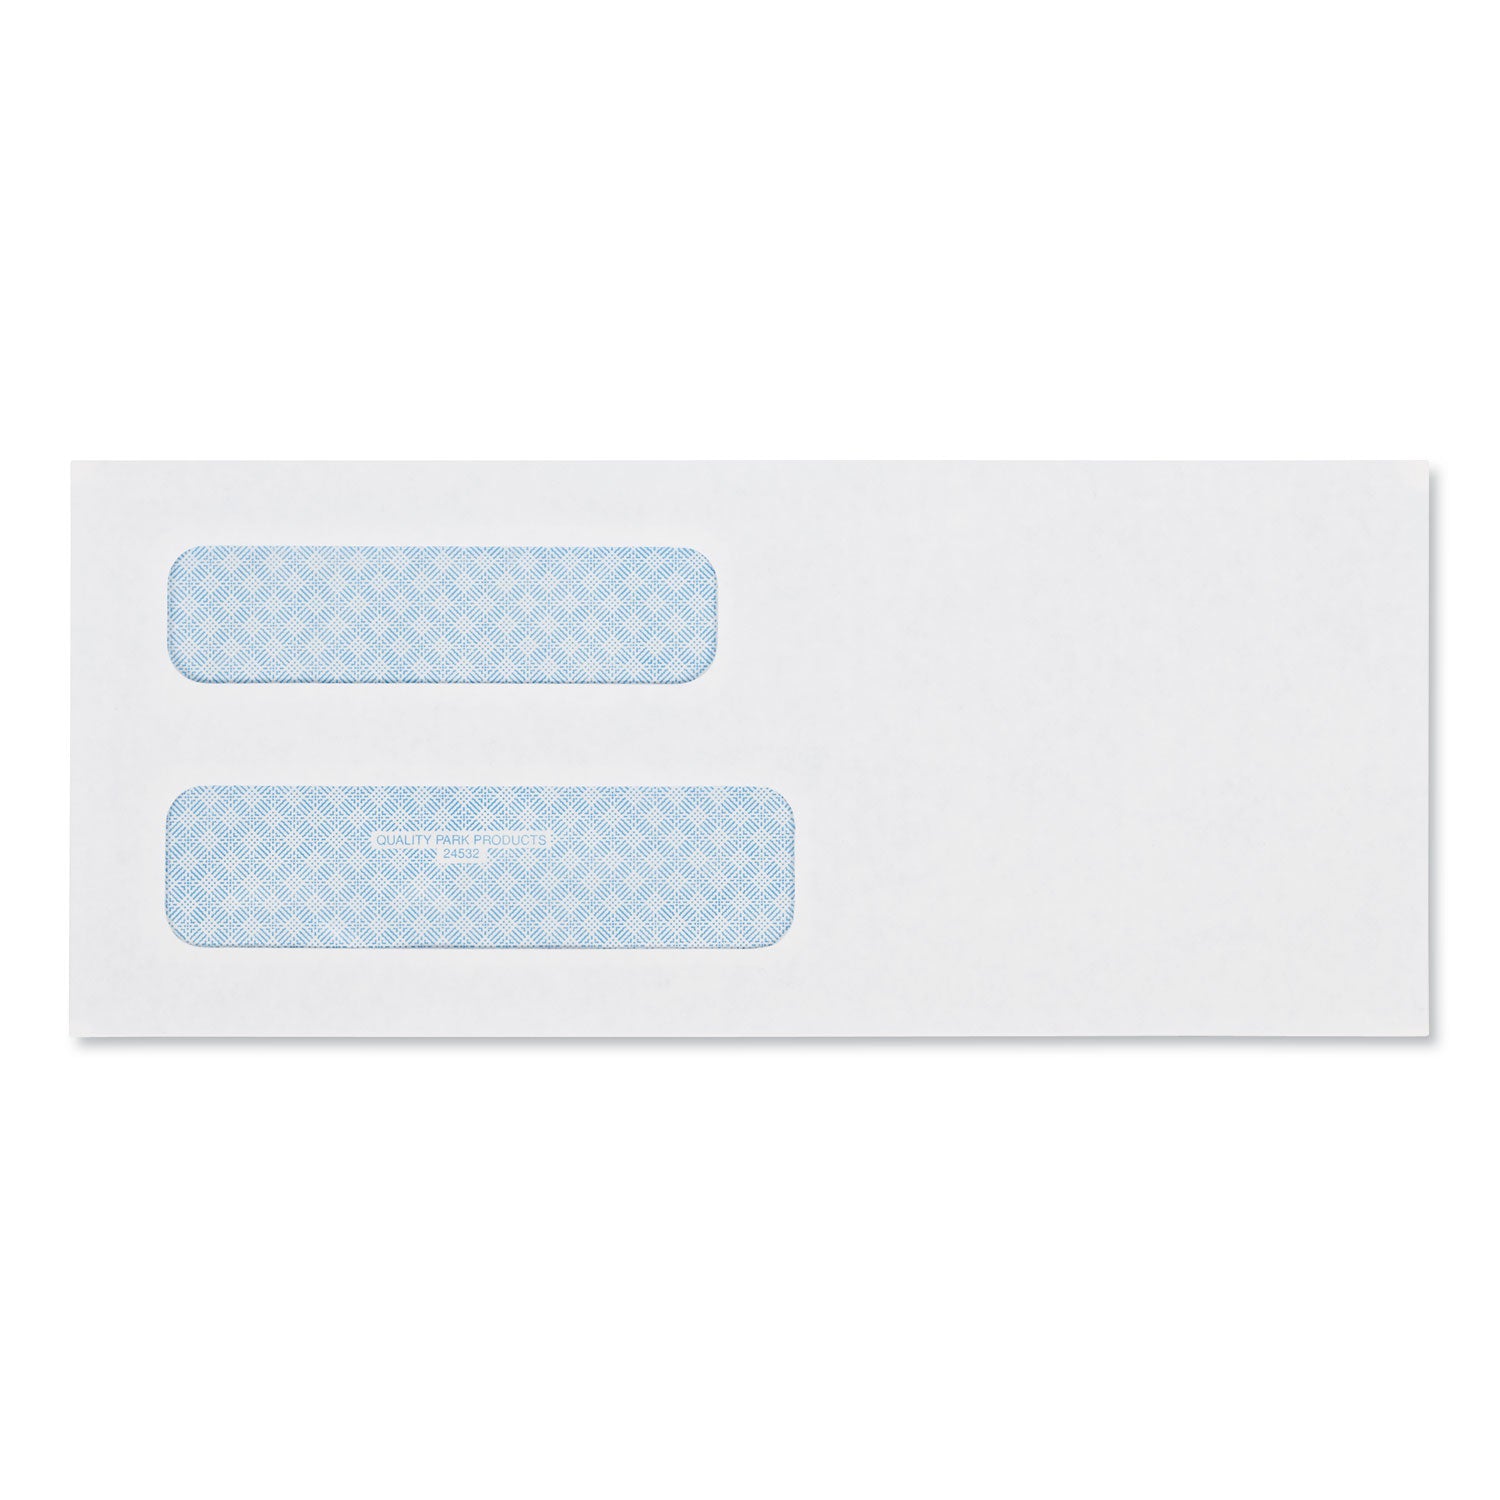 Double Window Security-Tinted Check Envelope, #8 5/8, Commercial Flap, Gummed Closure, 3.63 x 8.63, White, 500/Box - 